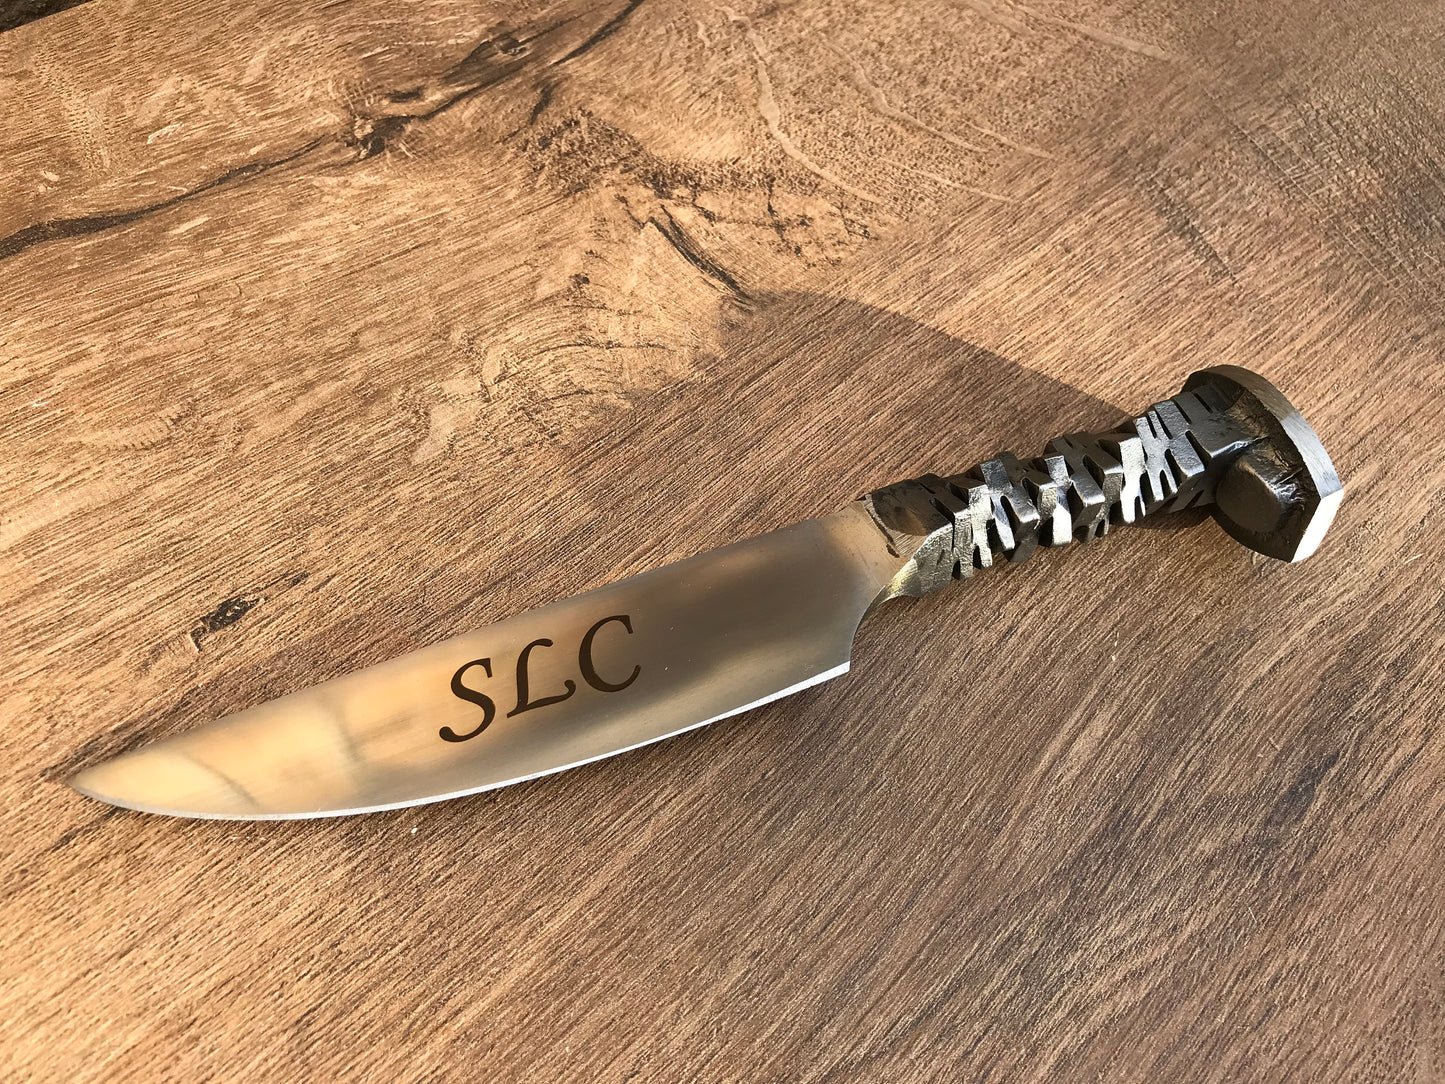 11th anniversary, steel gifts for him, engraved steel gift, railroad spike knife, 11th anniversary gift for him, steel jewelry, steel gifts